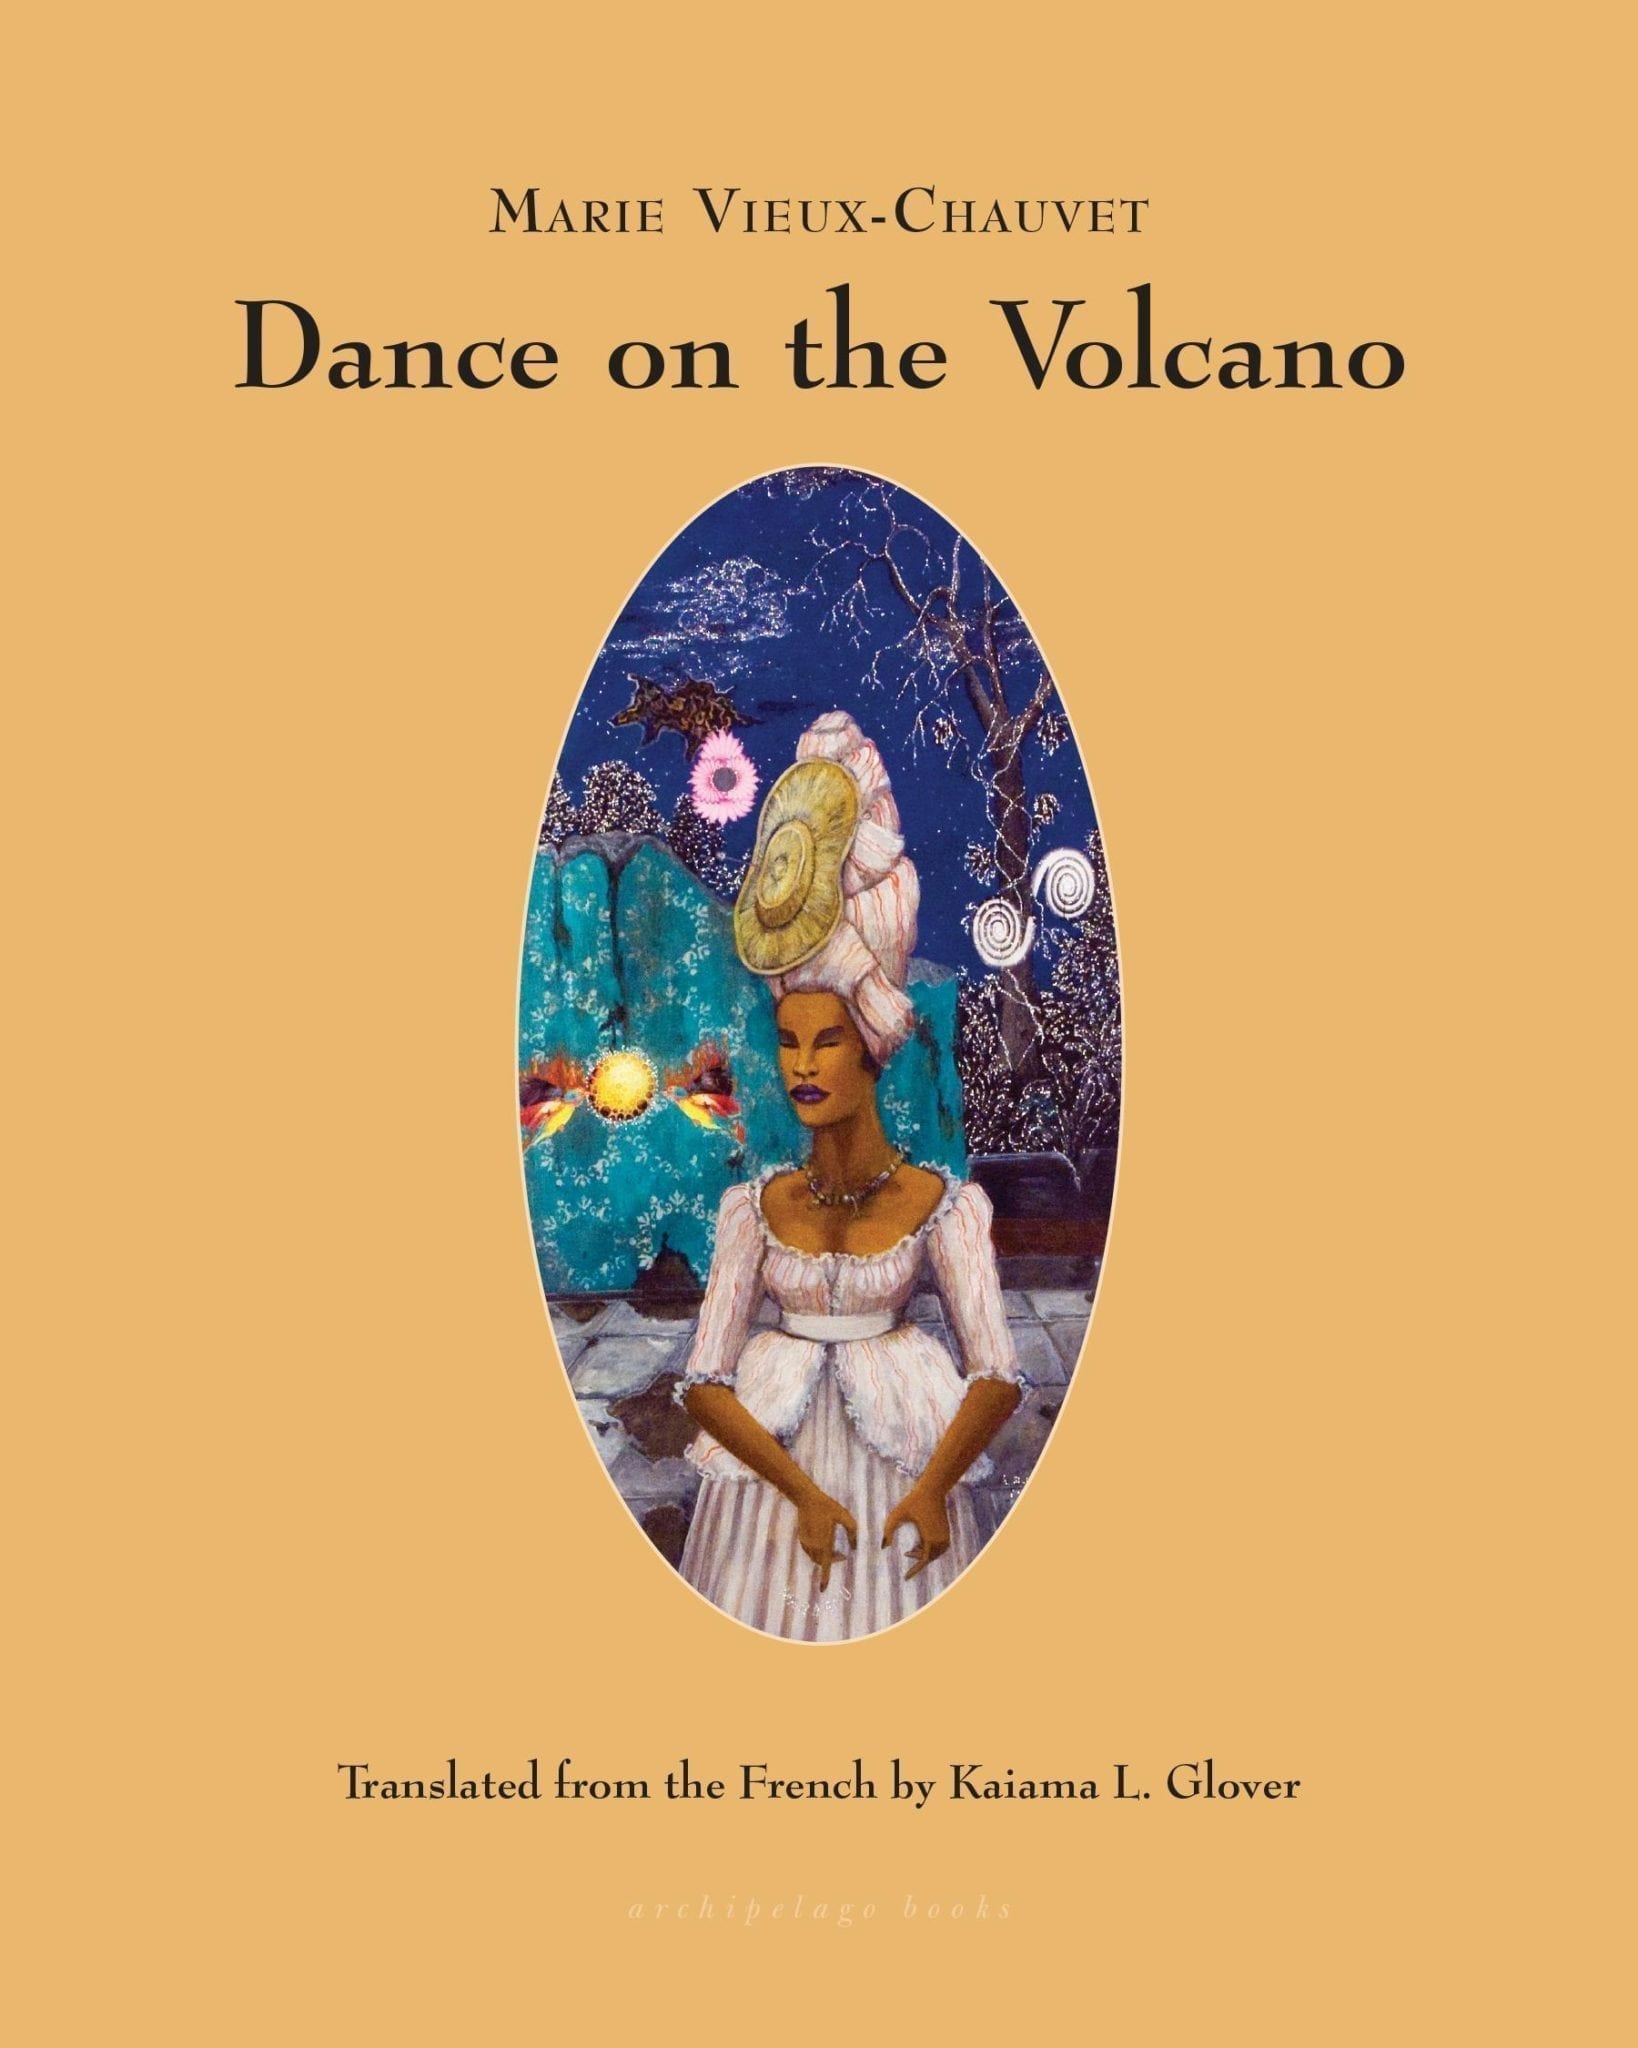 Cover of Dance on the Volcano by Marie Vieux-Chauvet